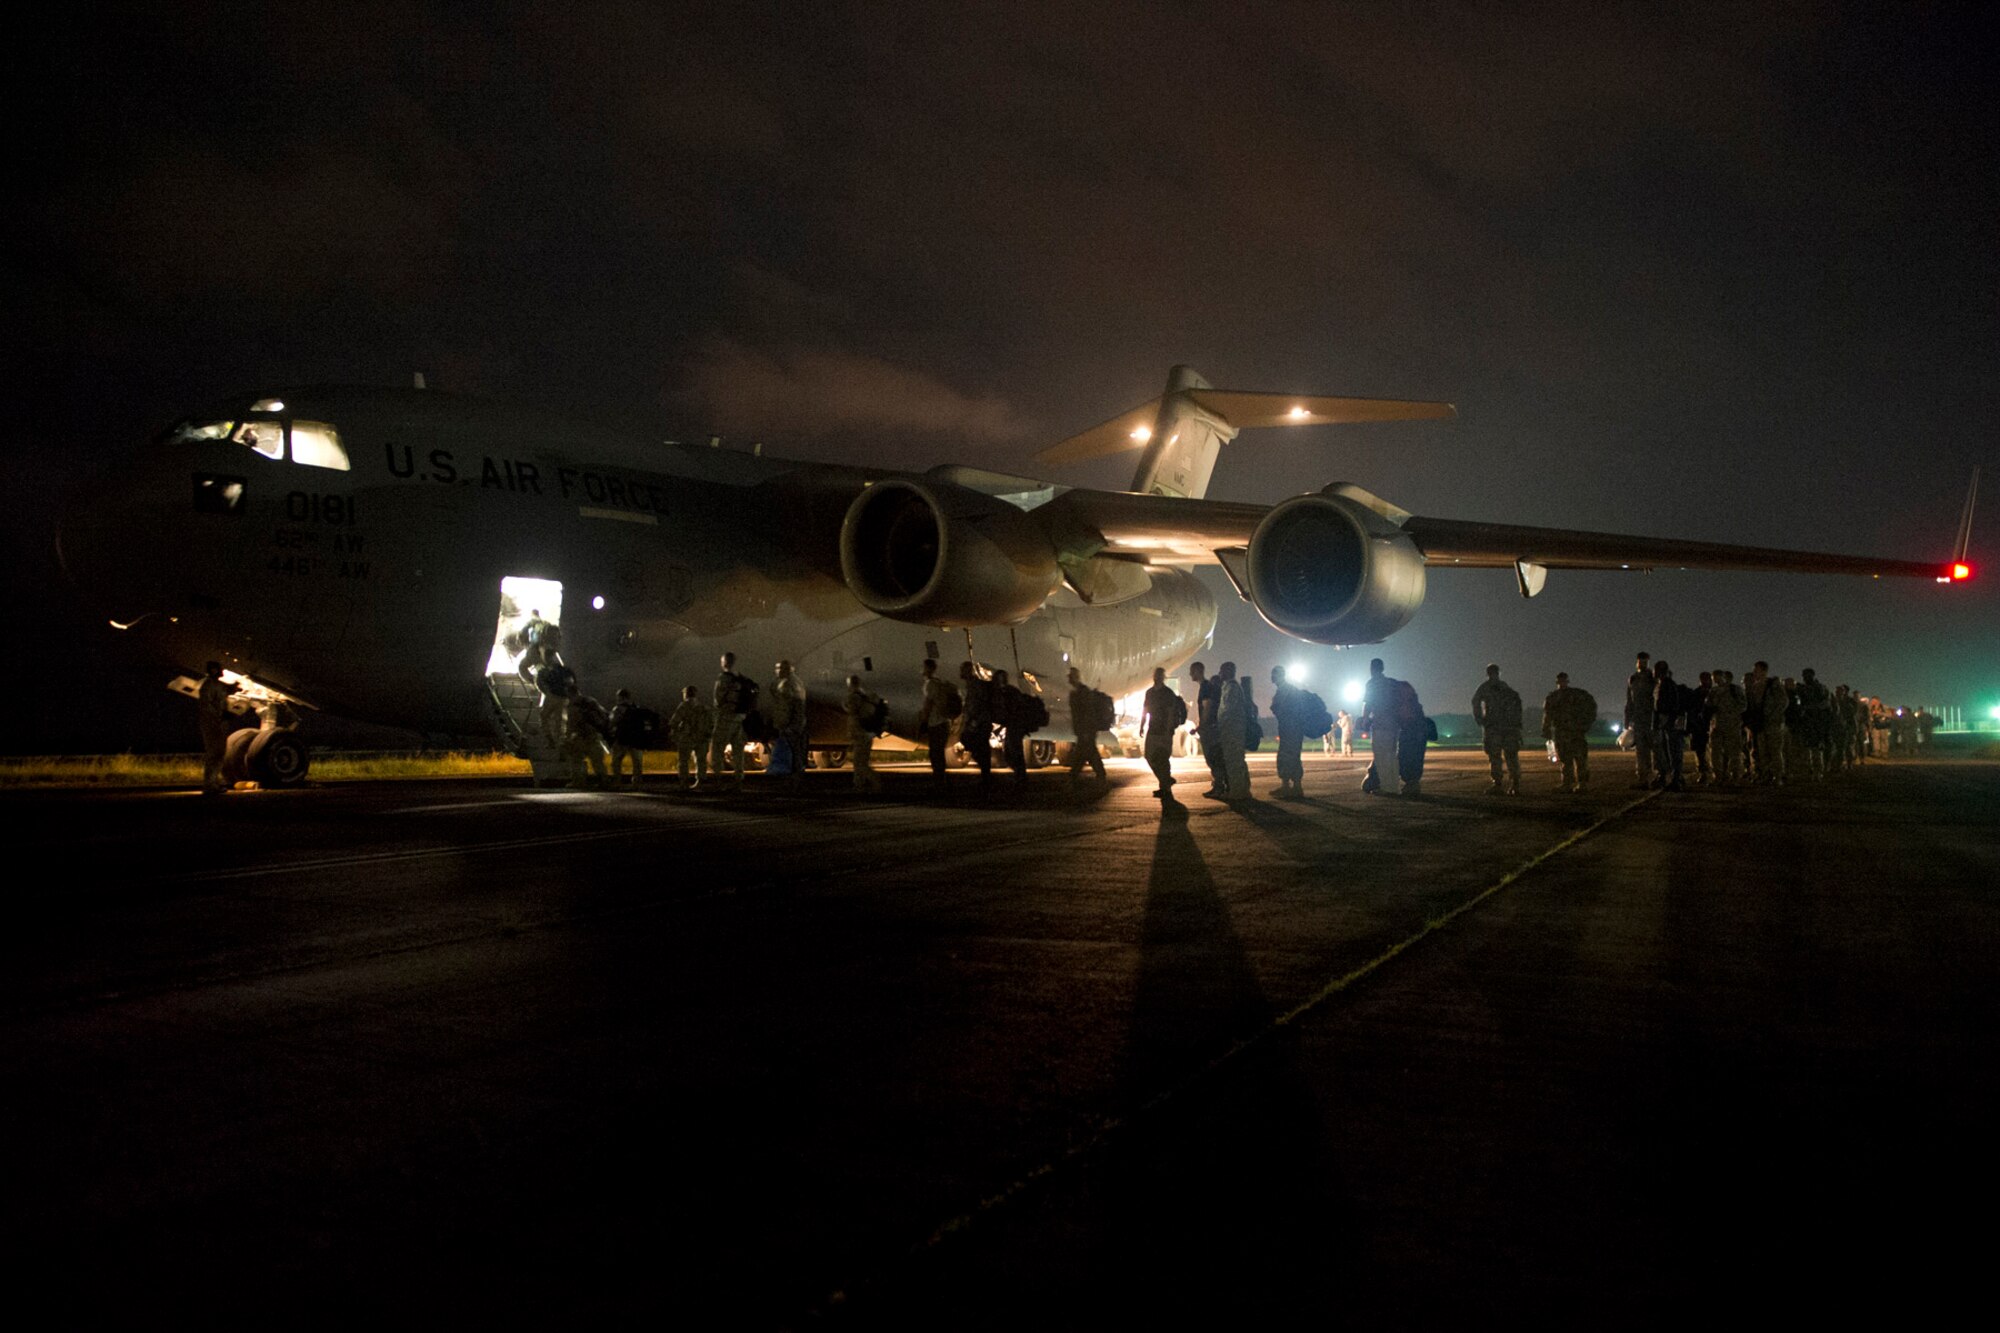 Members of the U.S. Air Force, Army, Navy and Marines board a U.S. Air Force C-17 Globemaster III at Roberts International Airport, Republic of Liberia, during Operation UNITED ASSISTANCE, Nov. 13, 2014. The service members took part in OUA, a Department of Defense operation in Liberia to provide logistics, training and engineering support to U.S. Agency for International Development-led efforts to contain the Ebola virus outbreak in western Africa. (U.S. Air Force photo/Staff Sgt. Gustavo Gonzalez/RELEASED)